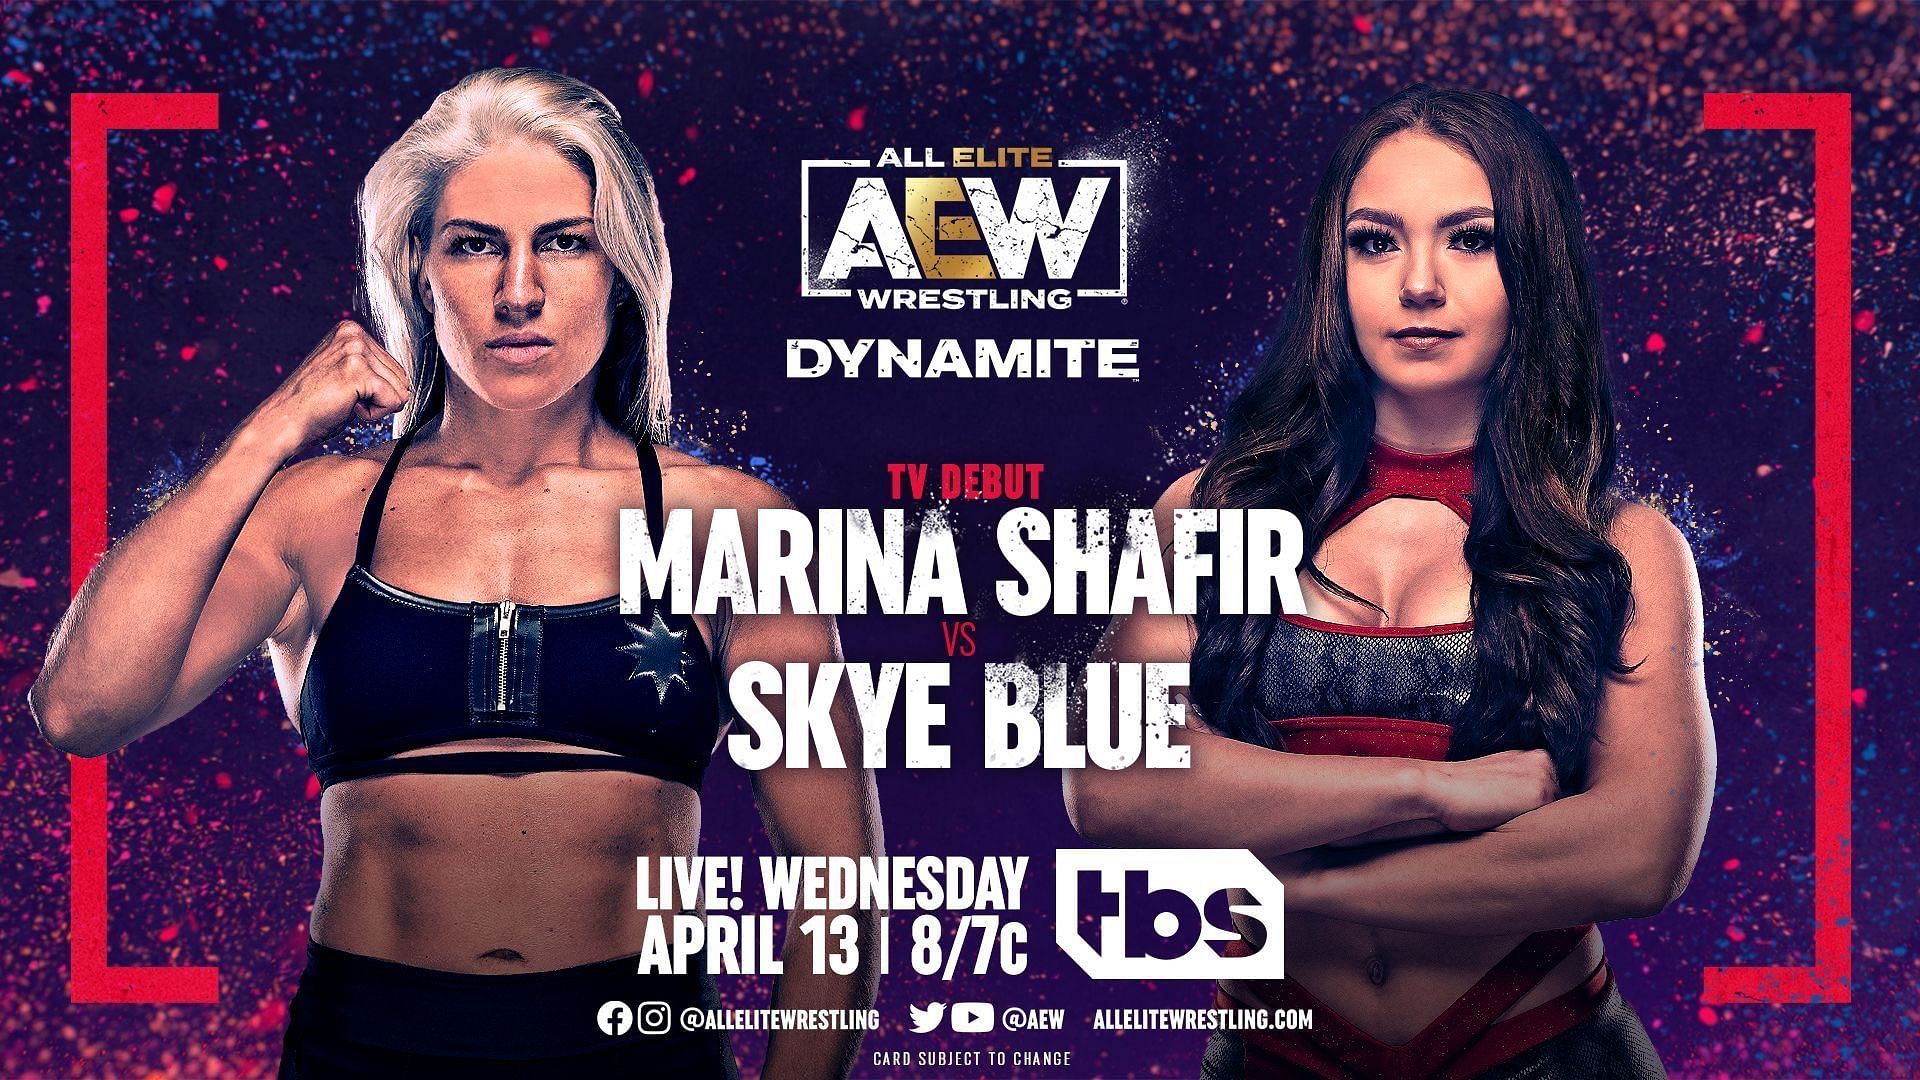 The MMA star comes into conflict with an AEW fan favorite